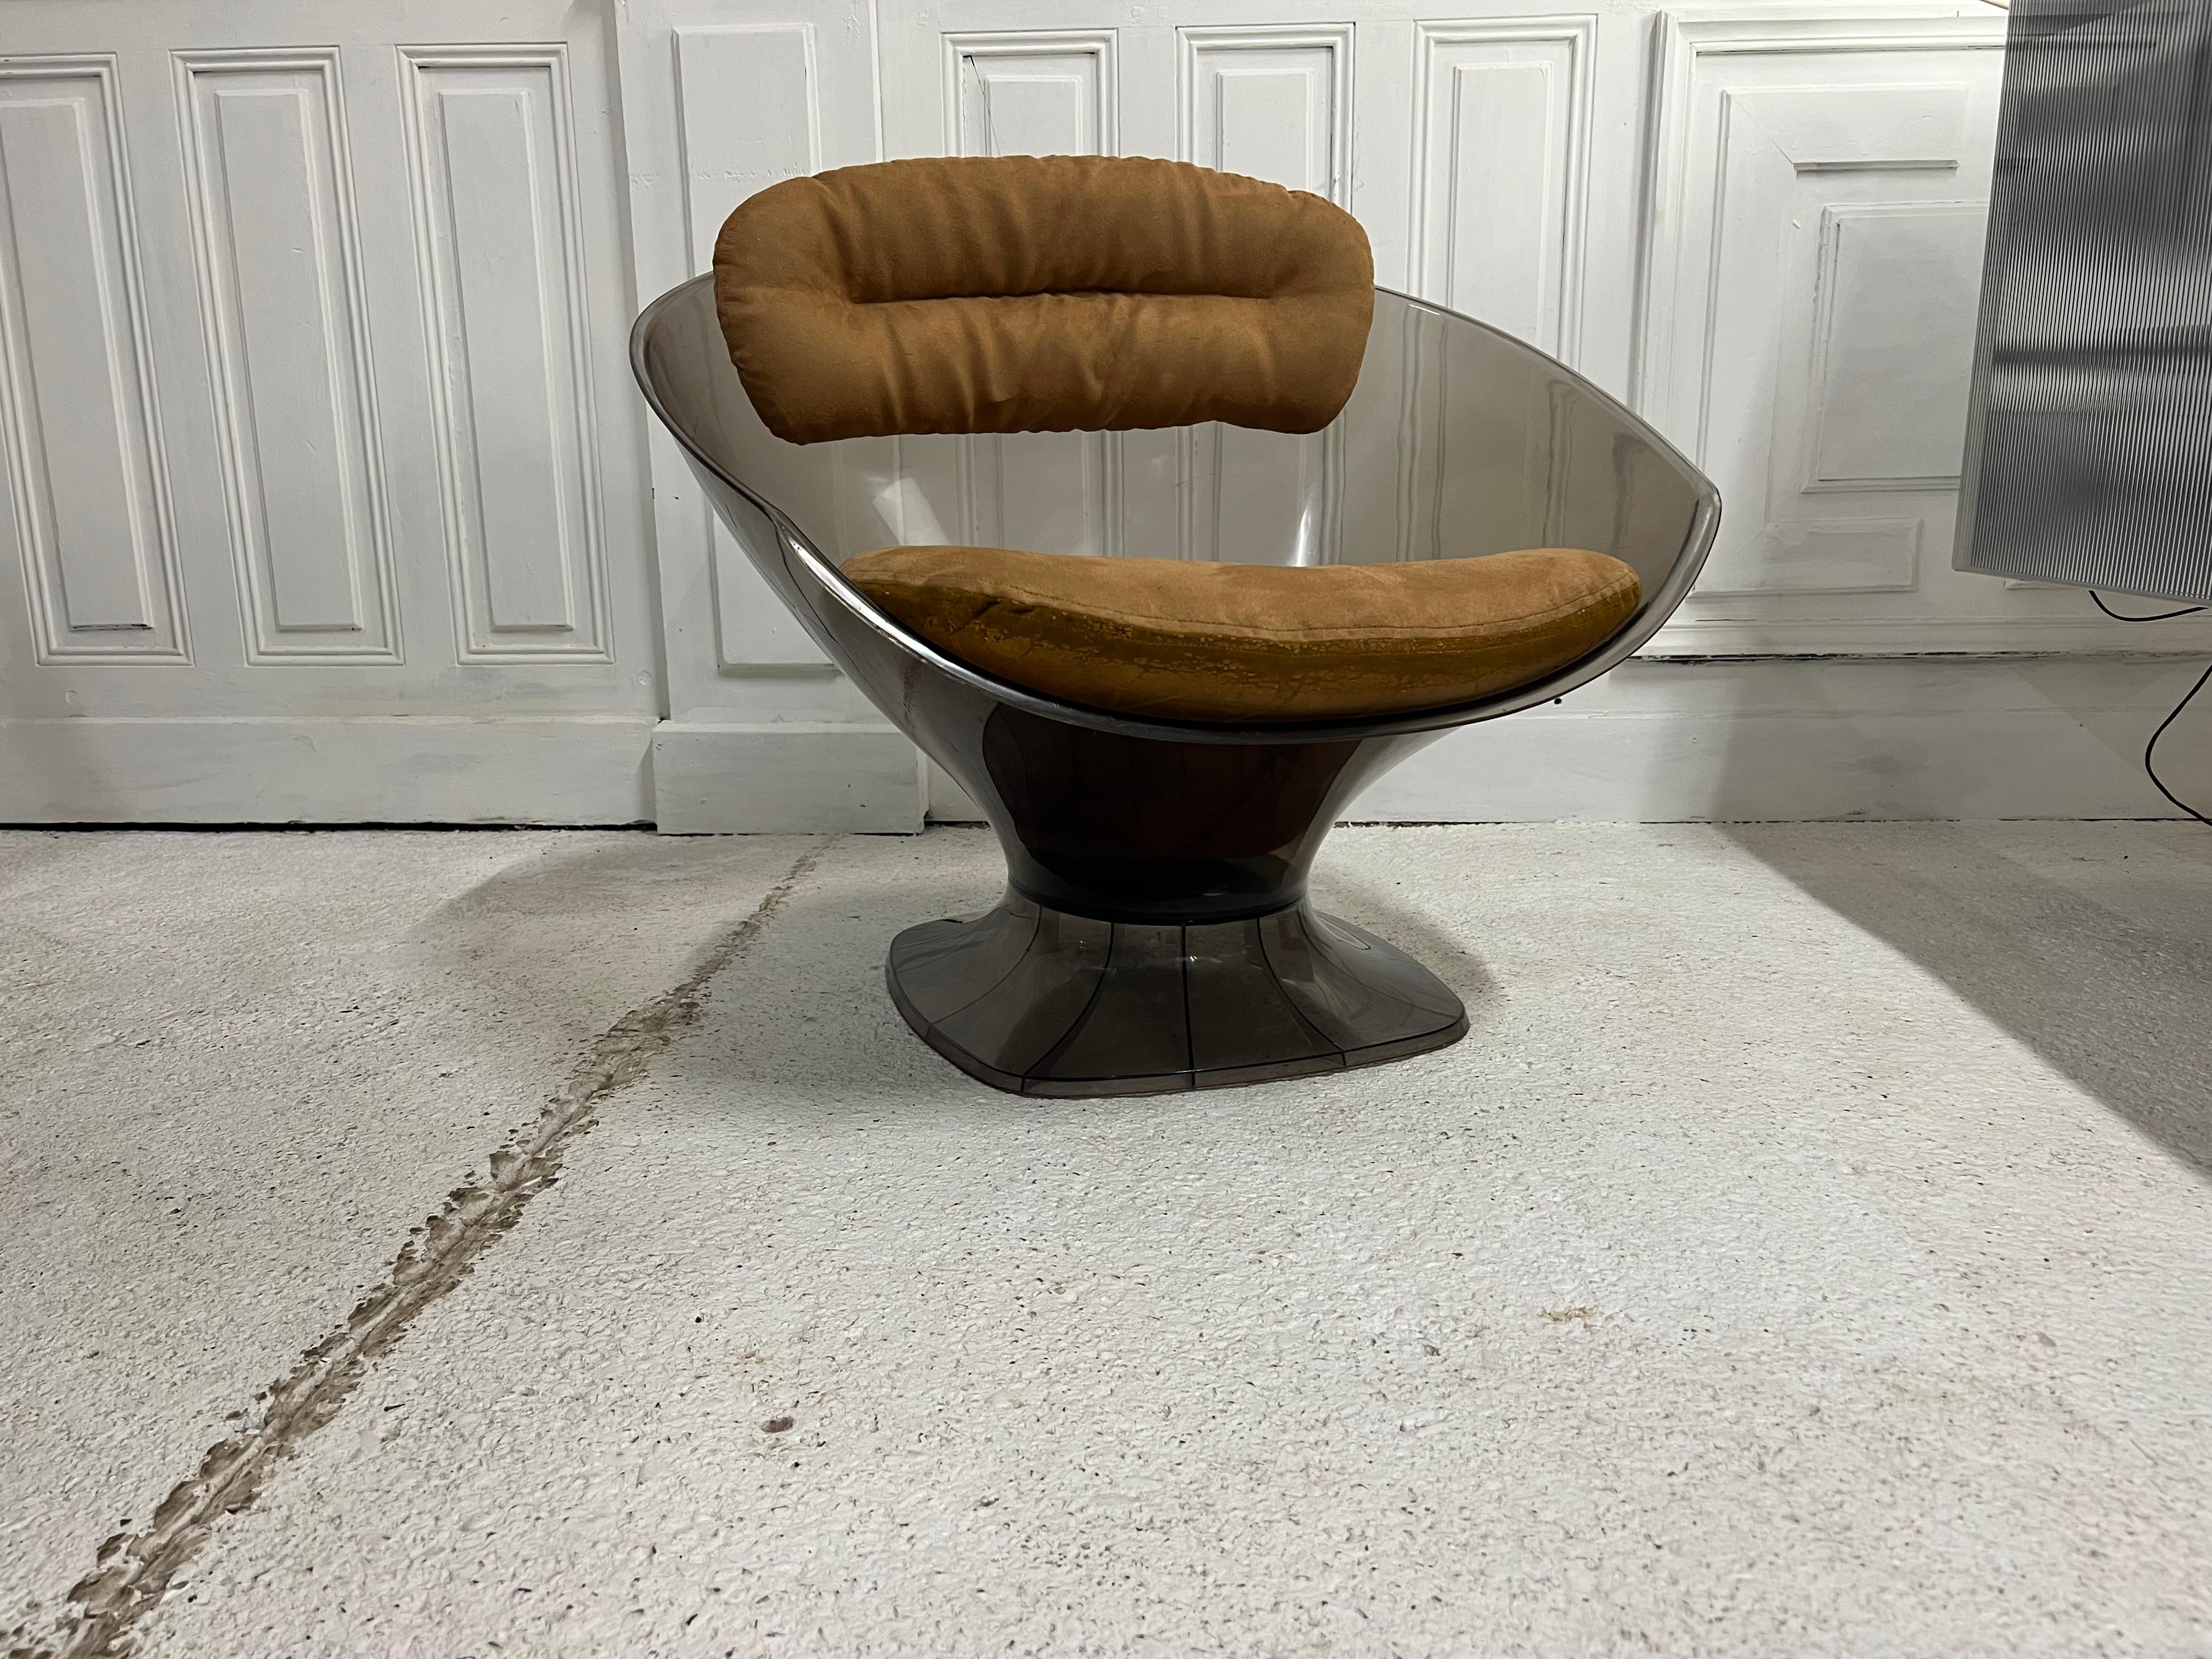 armchair called Club by Raphael in transparent amber color from the 60s space age

the cushions were reupholstered identically, we wanted to preserve the underside of the cushion originally in skai and its closure

Raphael Raffel
FRENCH,